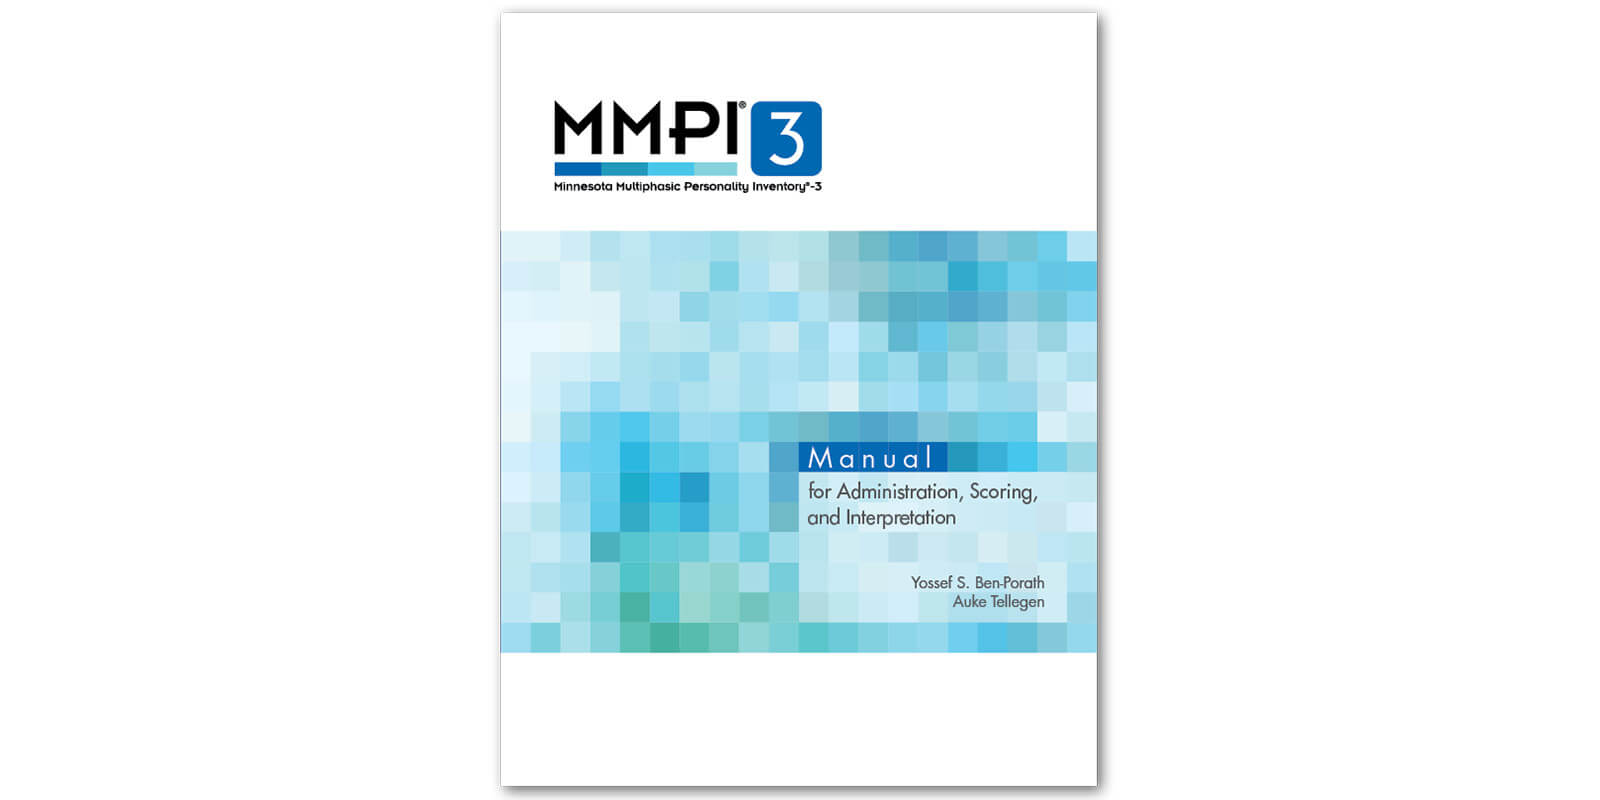 Minnesota Multiphasic Personality Inventory–3 (MMPI–3) - 